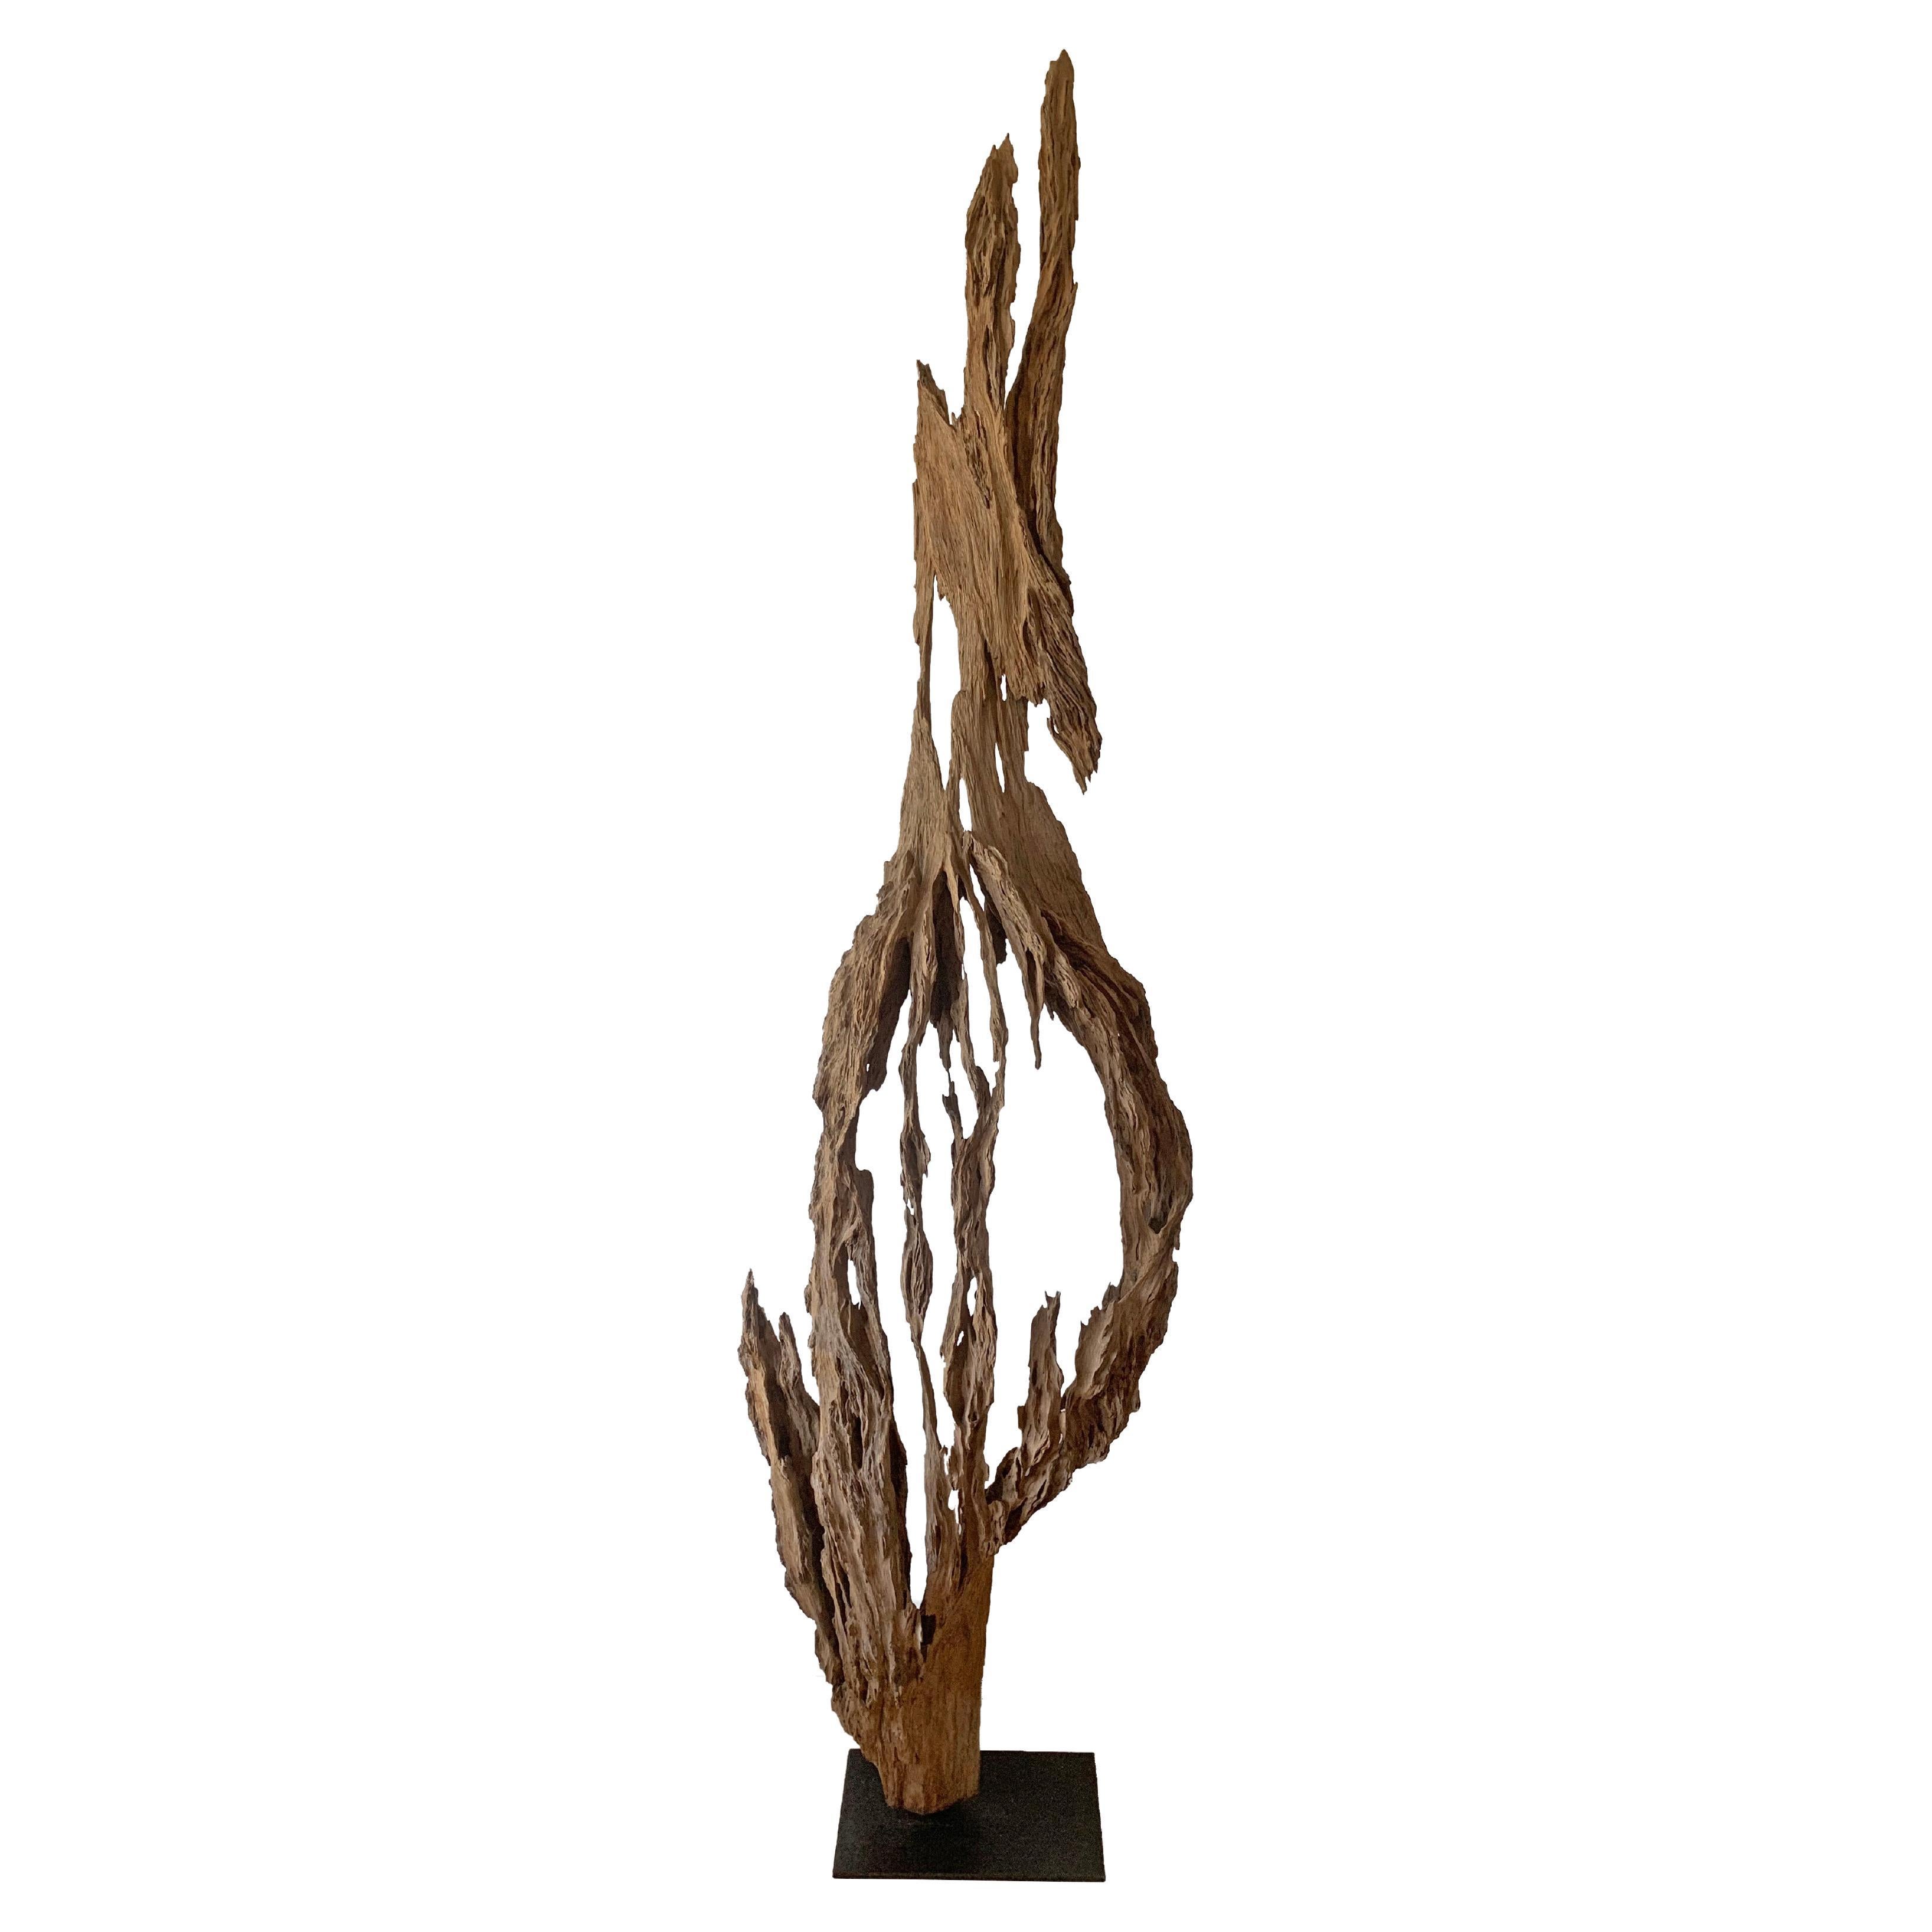 Eroded Teak Tree Skeleton Sculpture on Stand, Late 20th Century For Sale